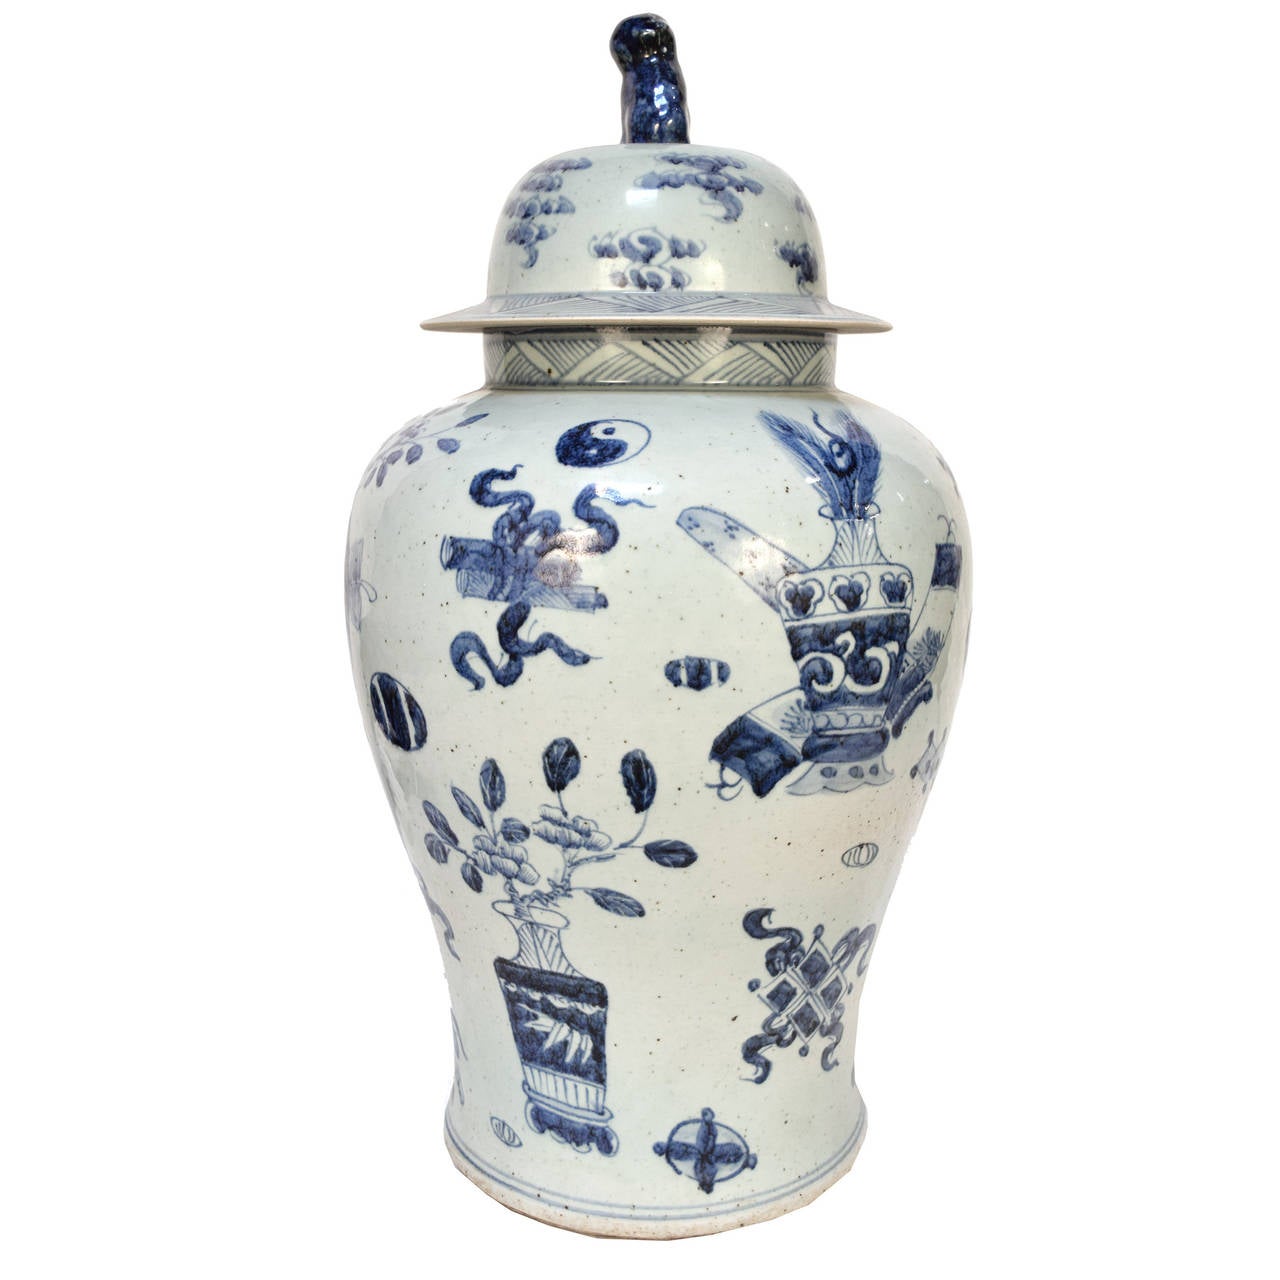 Chinese blue-and-white ceramics have inspired ceramists worldwide since cobalt was first introduced to China from the Middle East thousands of years ago. This contemporary vase from Beijing  assumes a traditional curved shape. Ranging from dark